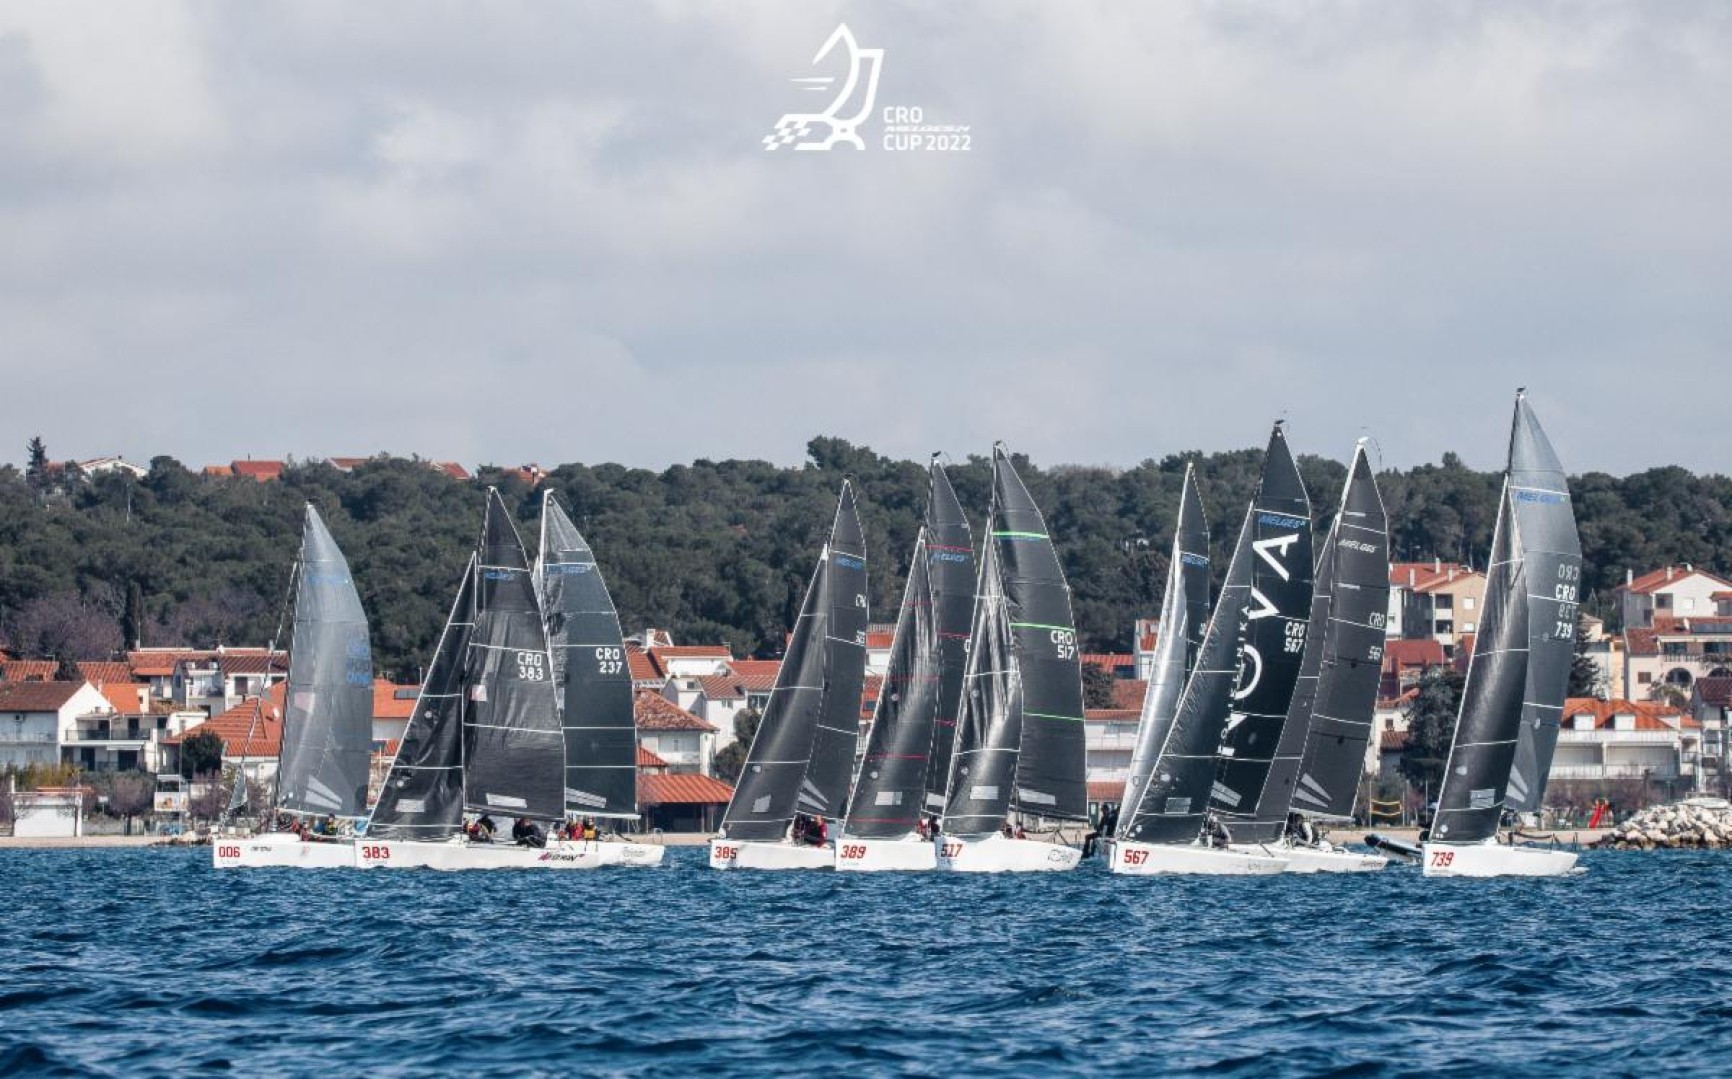 Croatian Melges 24 fleet started its season with holding the first Act of the CRO Melges 24 Cup 2022 already in January. Here's the event in Biograd in February. © regate.com.hr